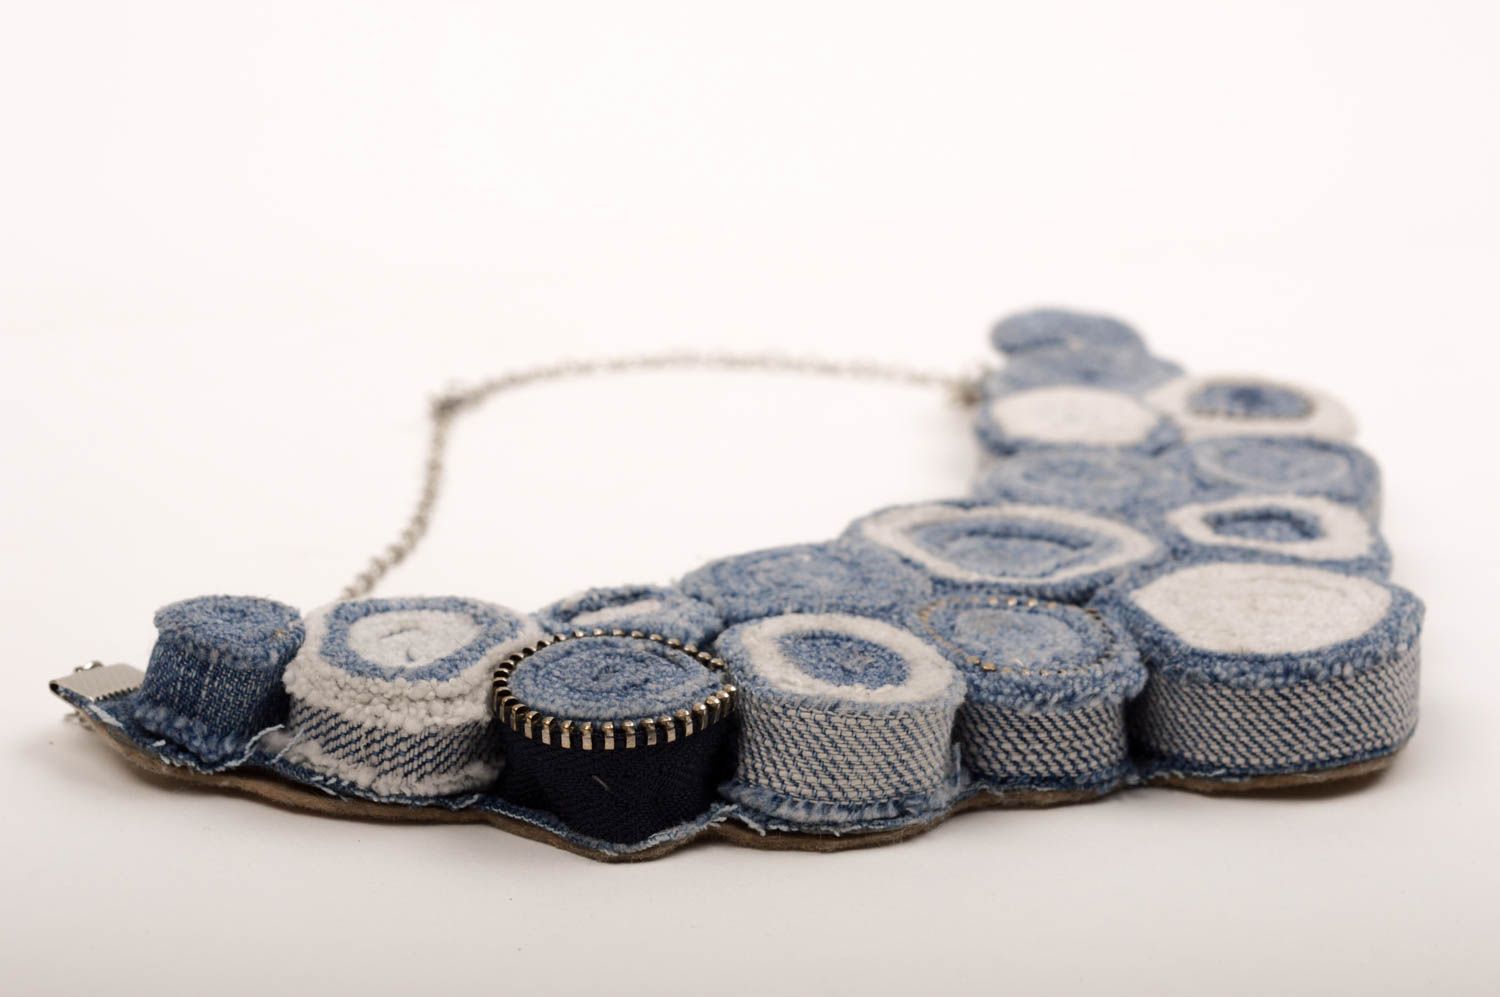 DIY Denim Necklace with Tassel Tutorial from Gloria Fort.This DIY denim  necklace is made out of the side seam of a … | Denim jewelry, Denim  earrings, Beaded jewelry